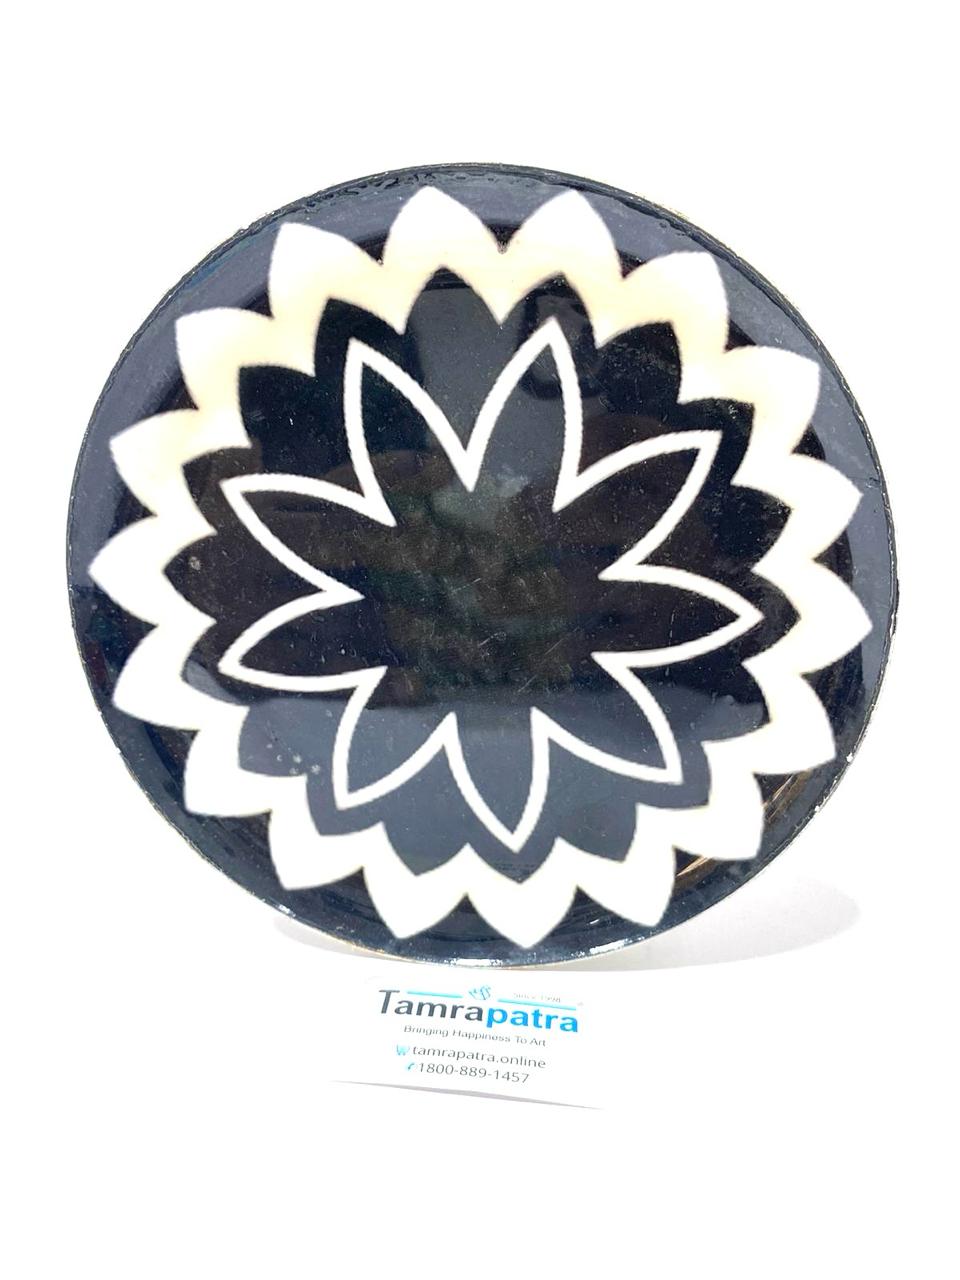 Wall Hanging Metal Plates Décor Standard Size In Exciting Designs By Tamrapatra